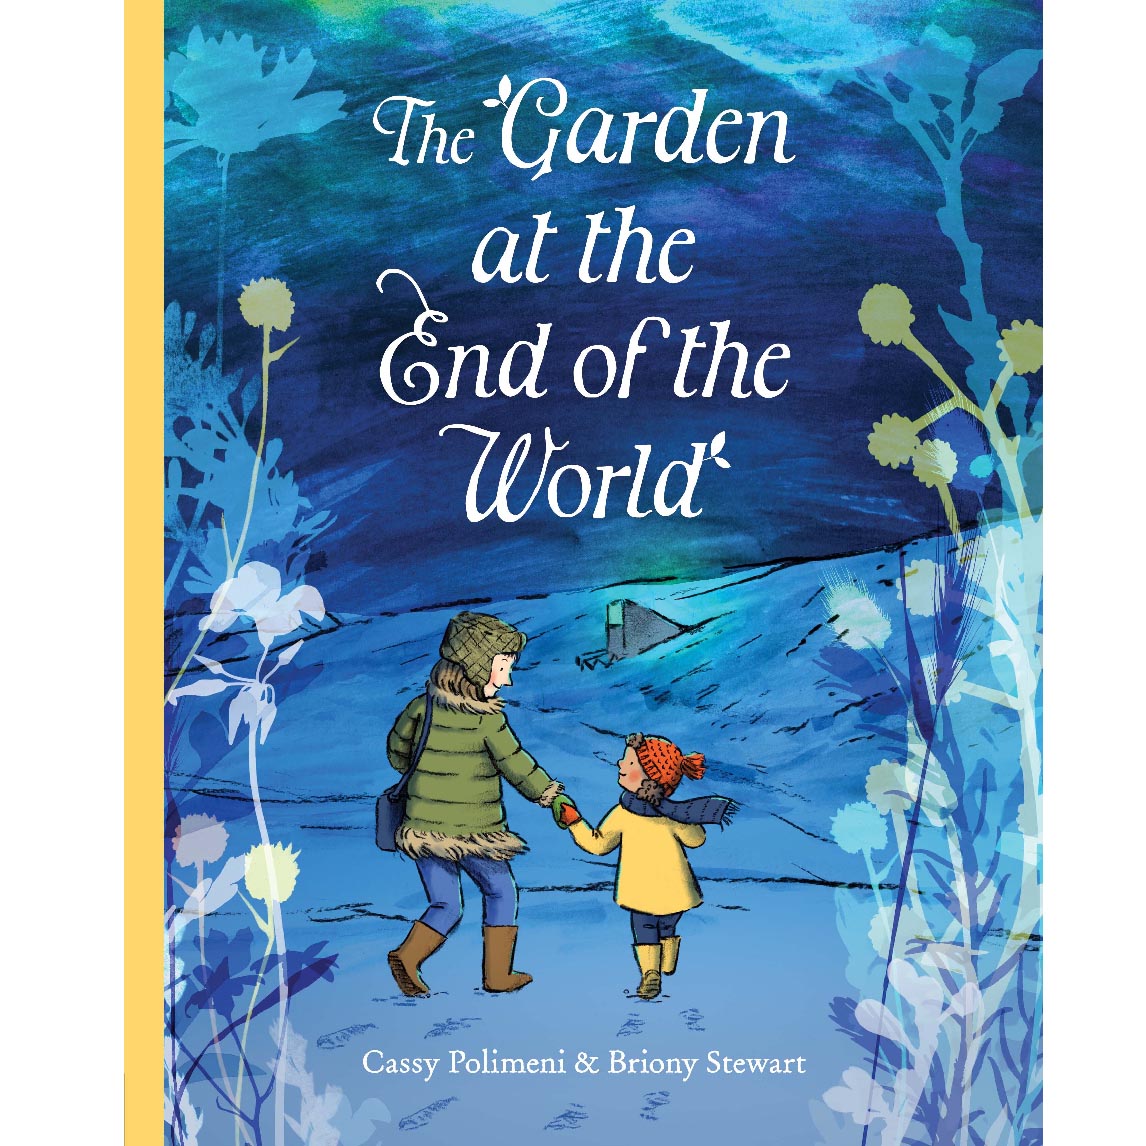 The Garden at the end of the World by Cassy Polimeni & Briony Stewart